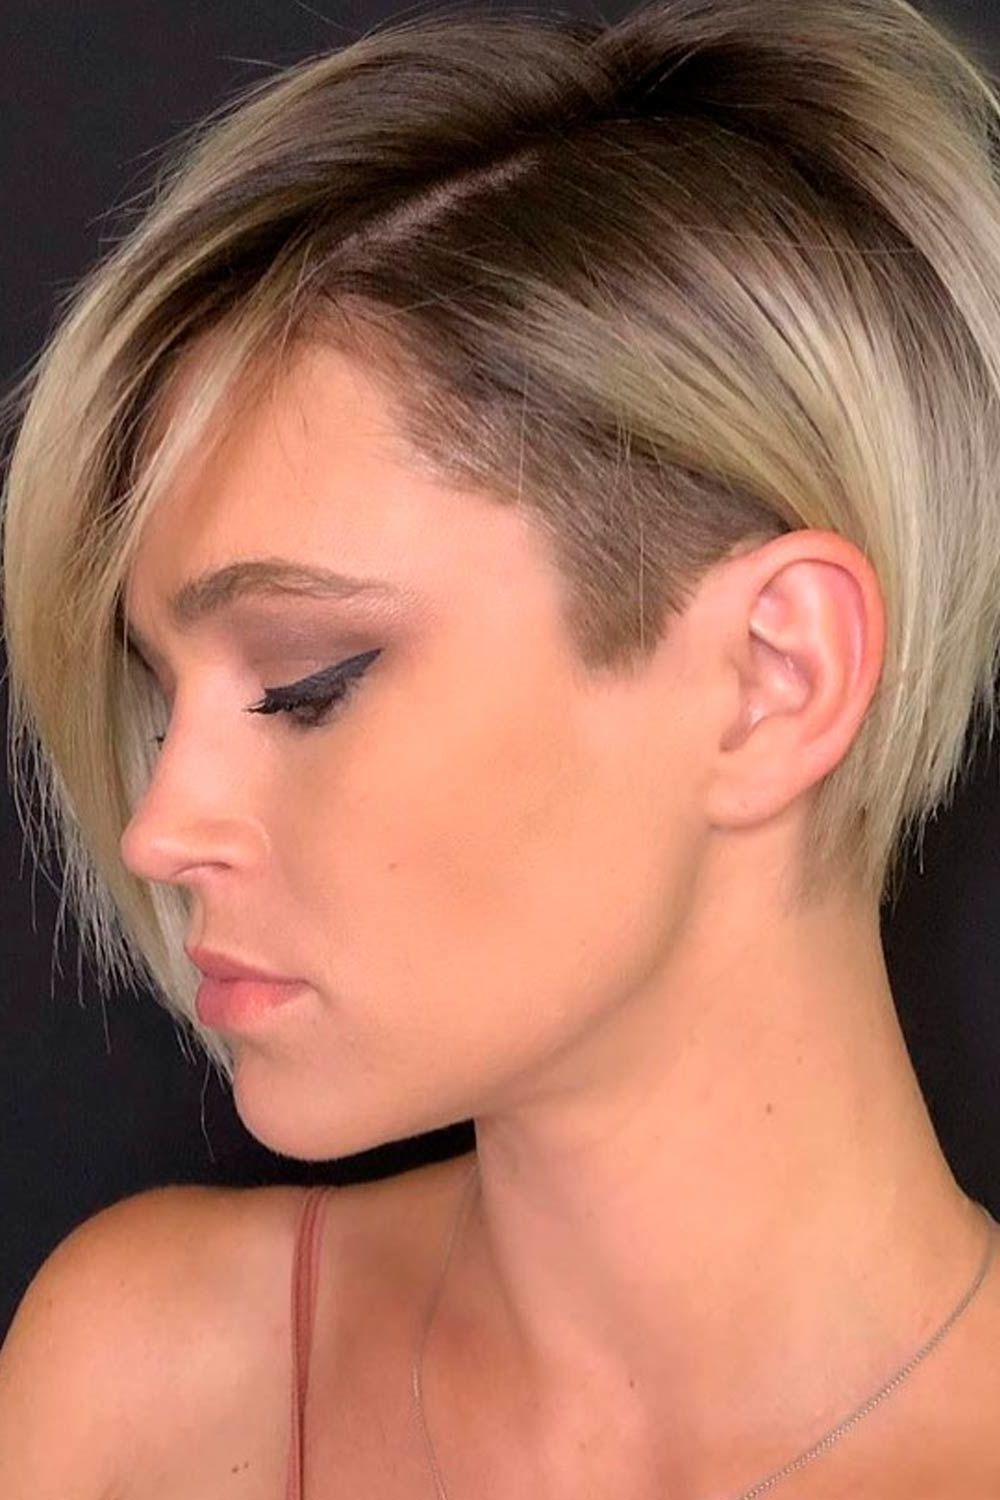 35+ Types Of Asymmetrical Pixie To Consider | Lovehairstyles With Regard To Side Parted Pixie Hairstyles With An Undercut (View 12 of 20)